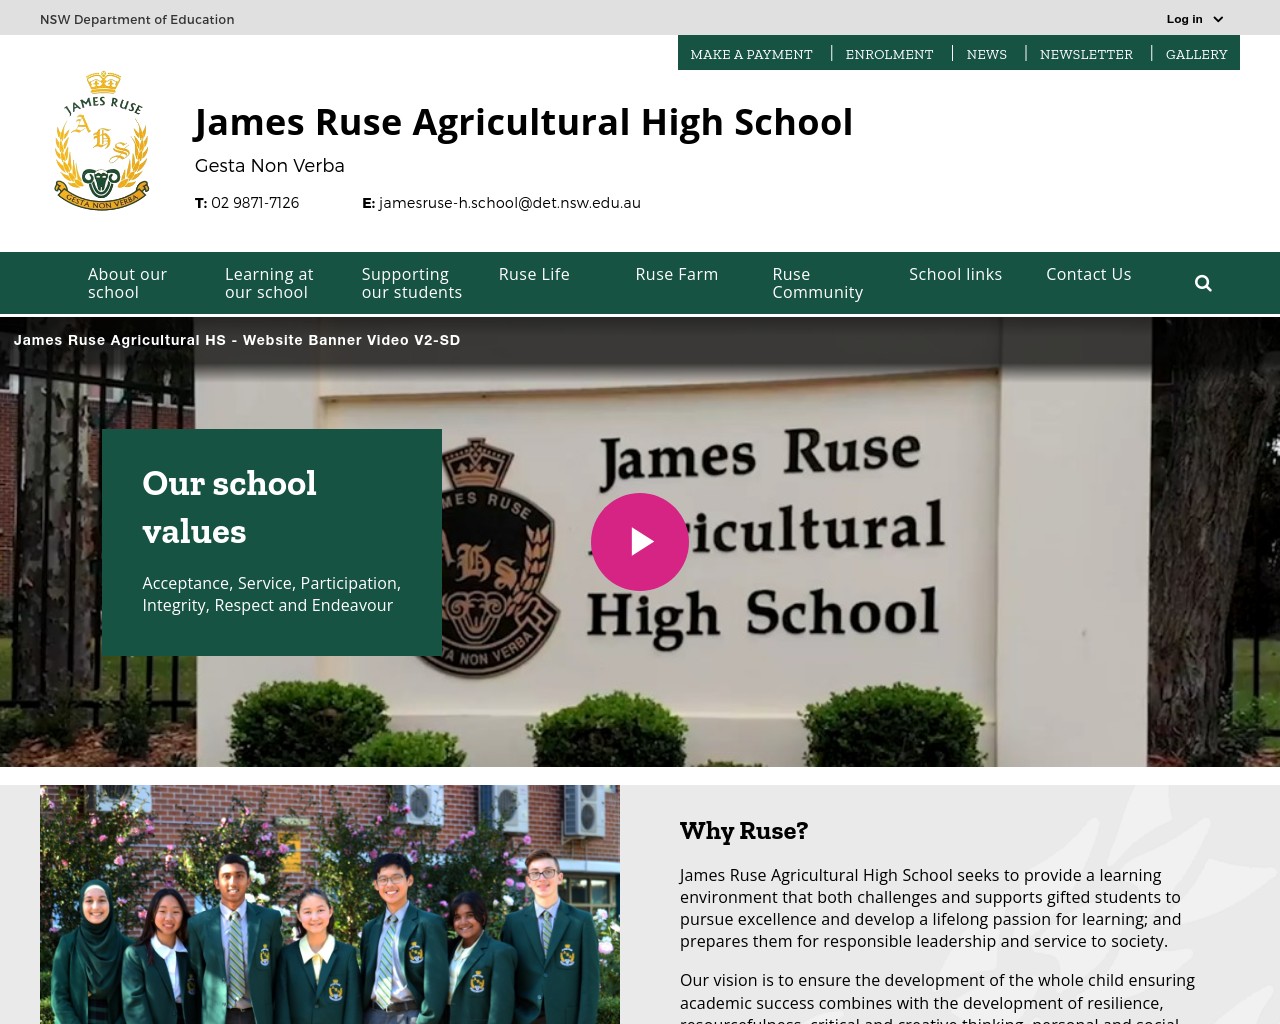 James Ruse Agricultural High School